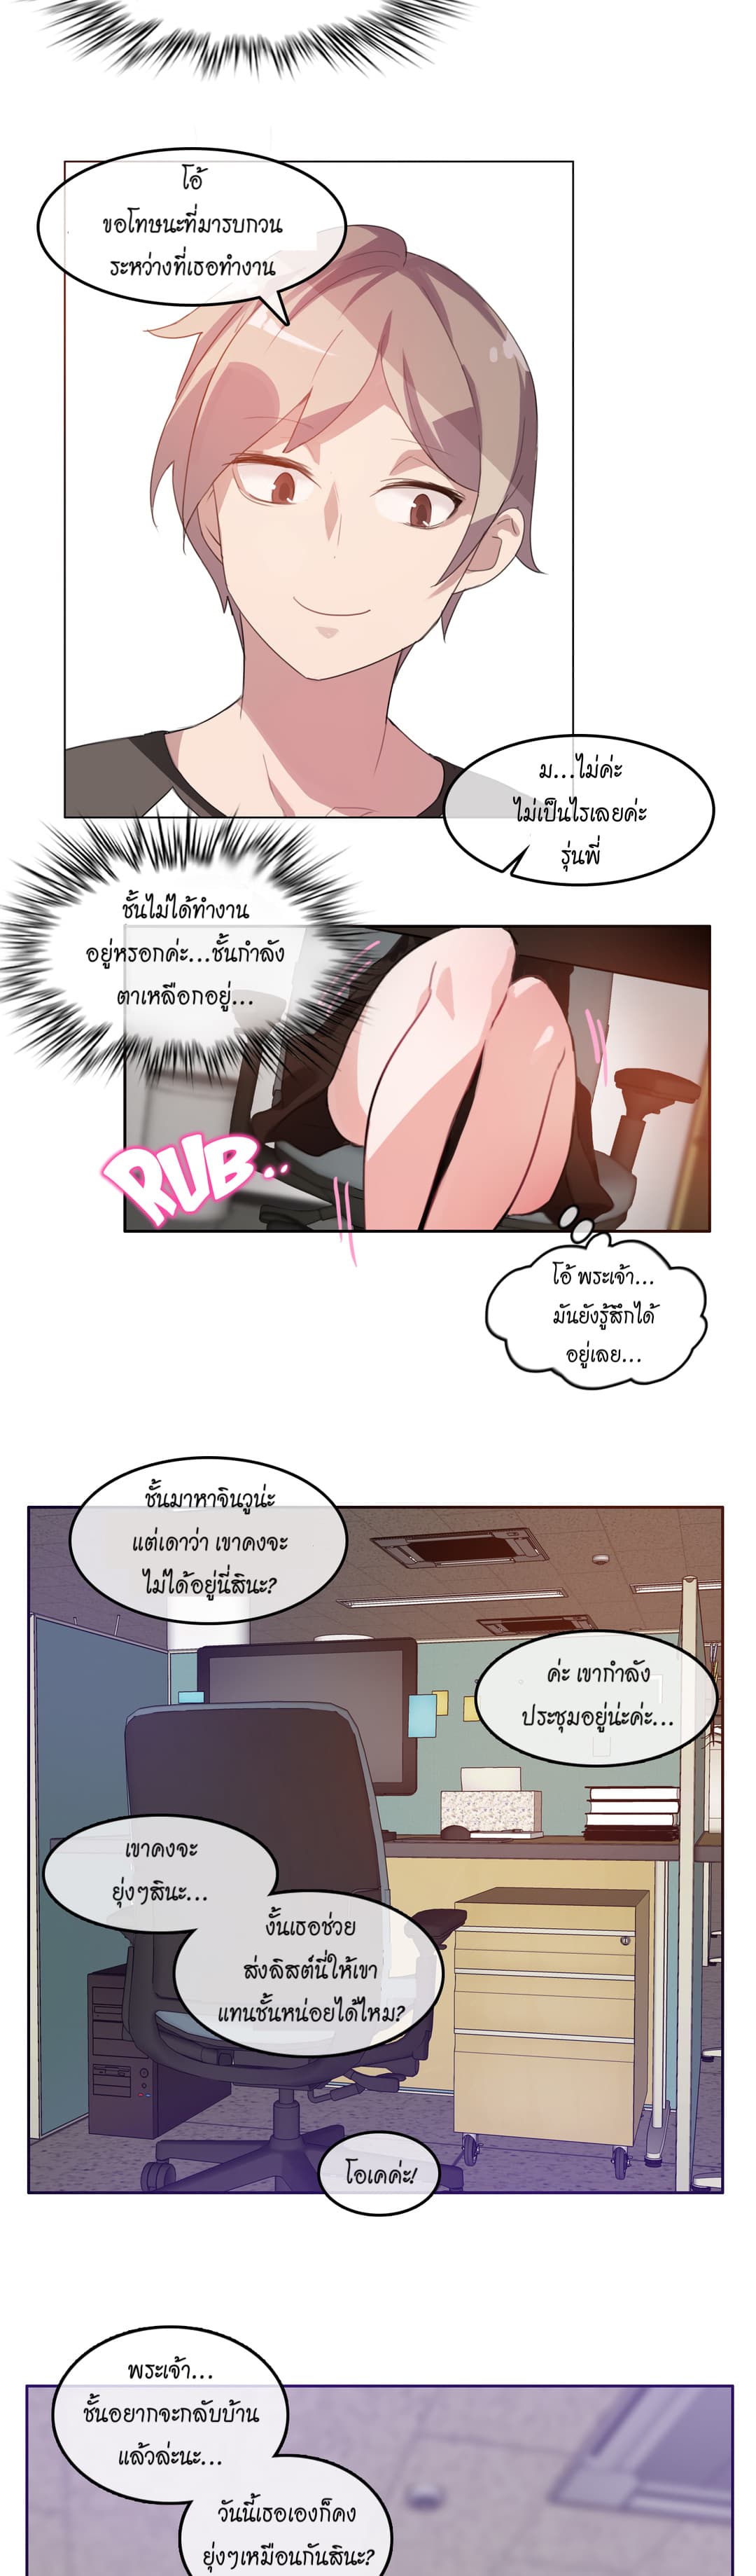 A Pervert’s Daily Life 13 (14)